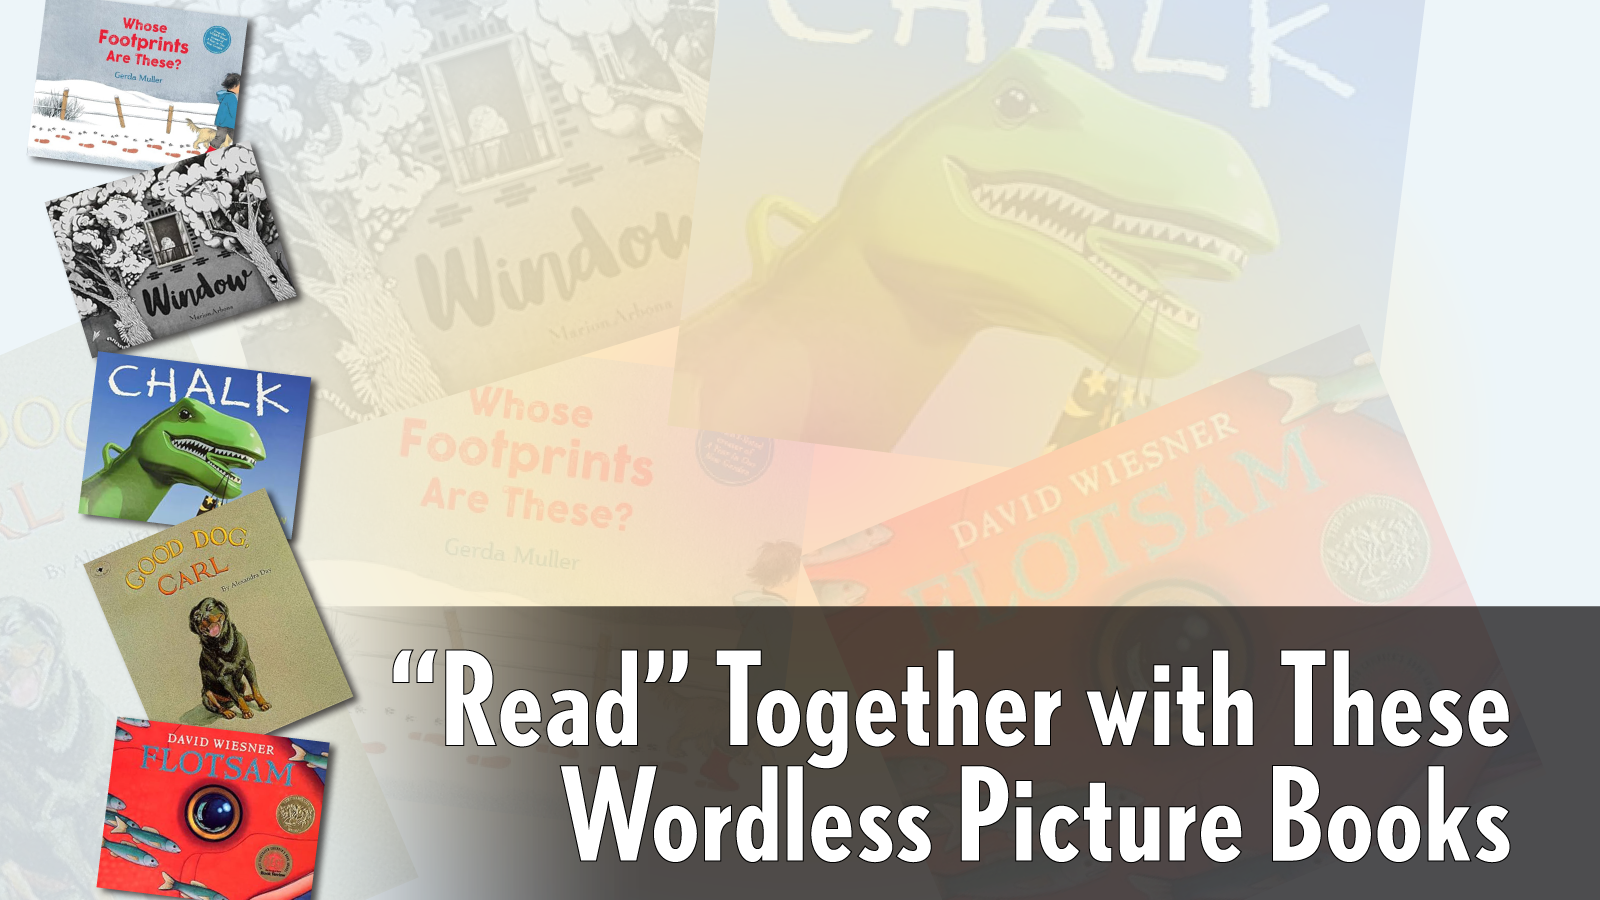 “Read” Together with These Wordless Picture Books